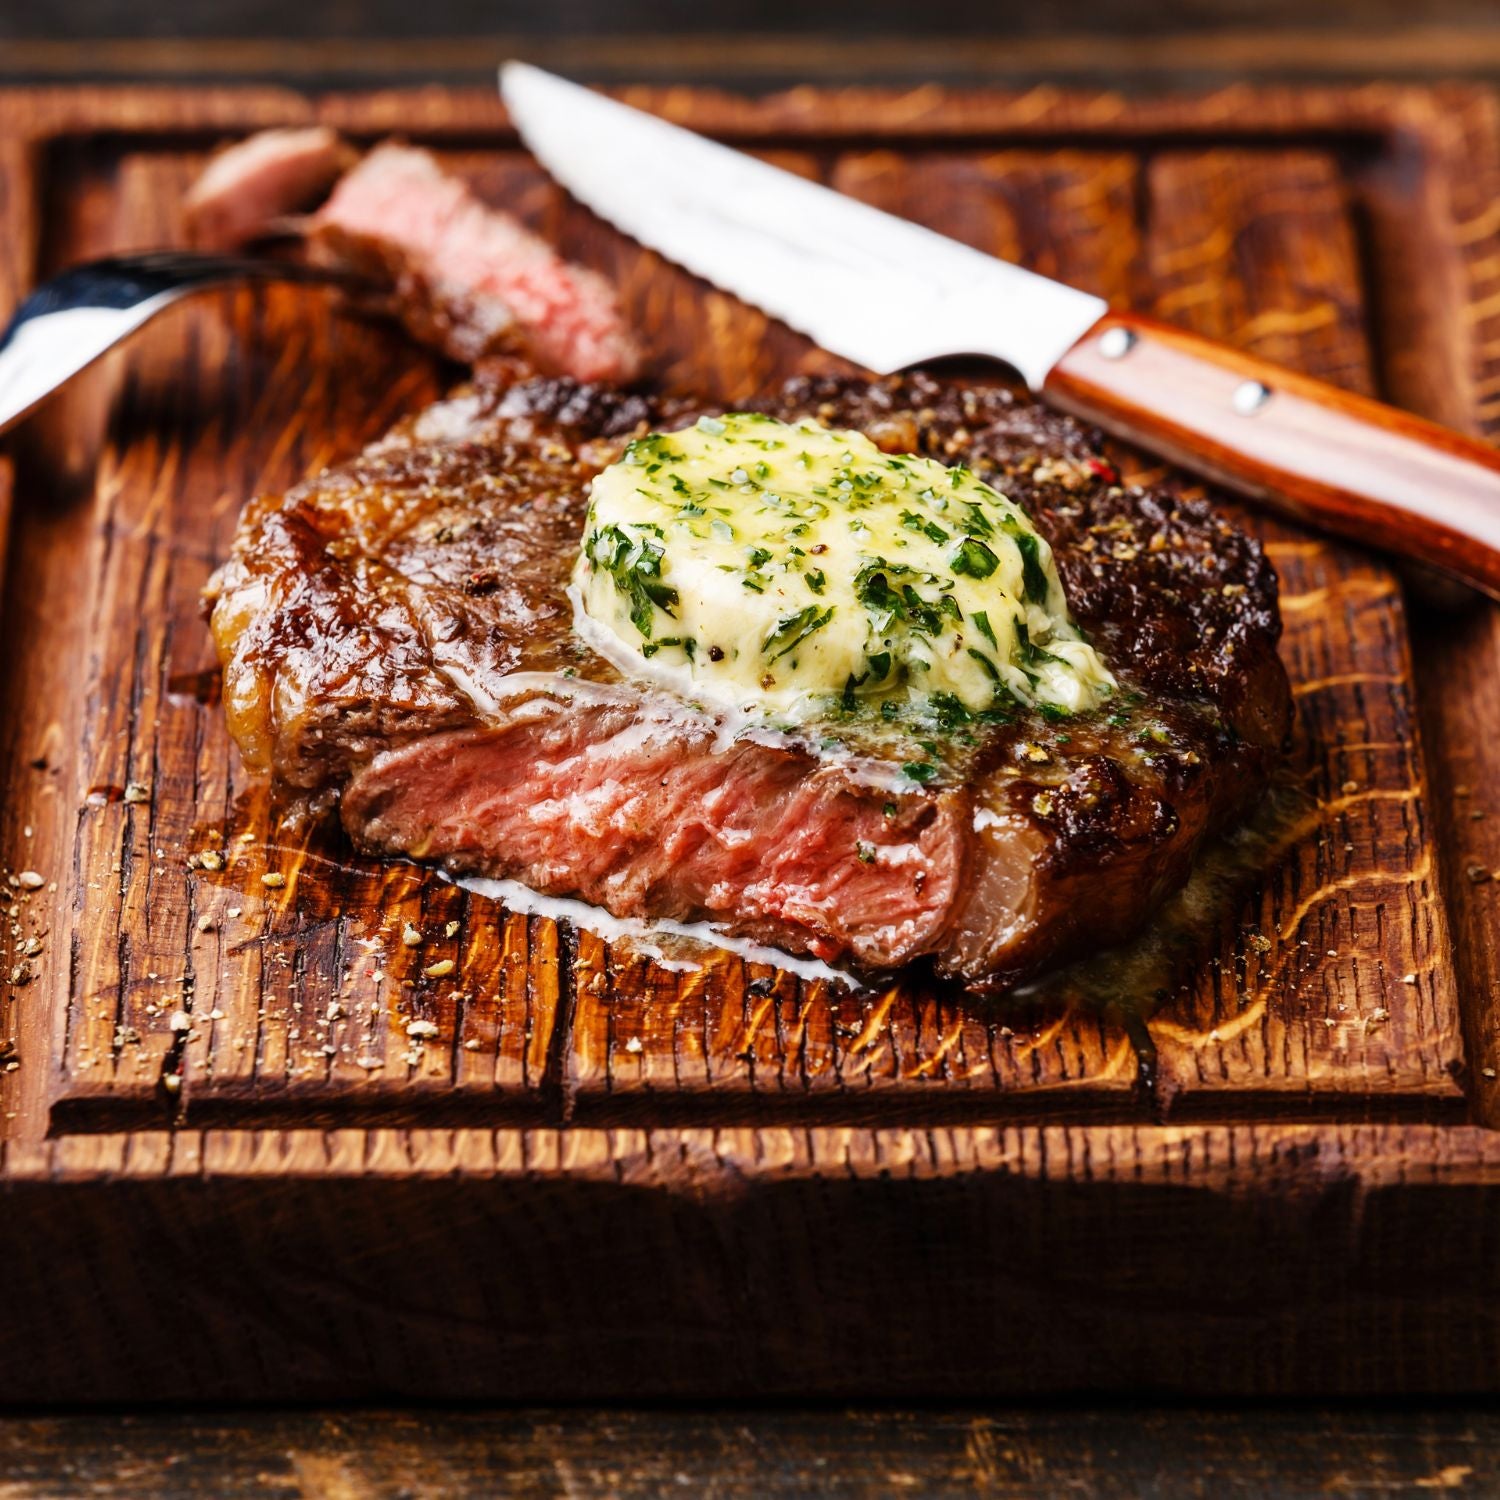 Juicy and flavorful grilled steak topped with herb butter